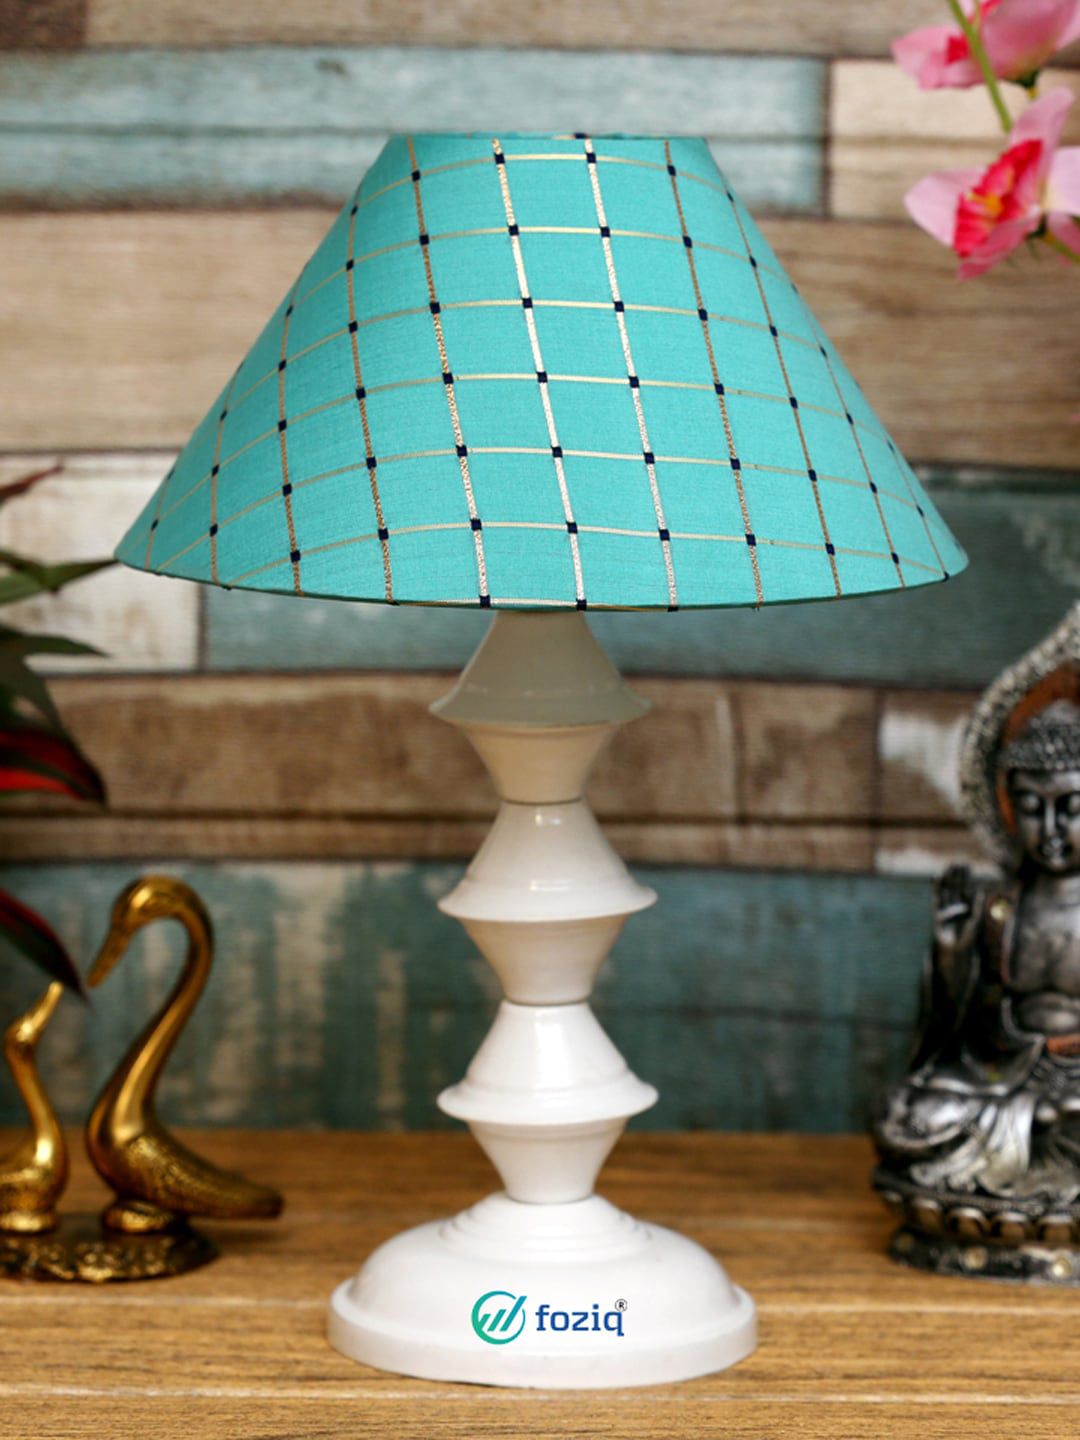 foziq White & Blue Printed Country Table Lamp Price in India